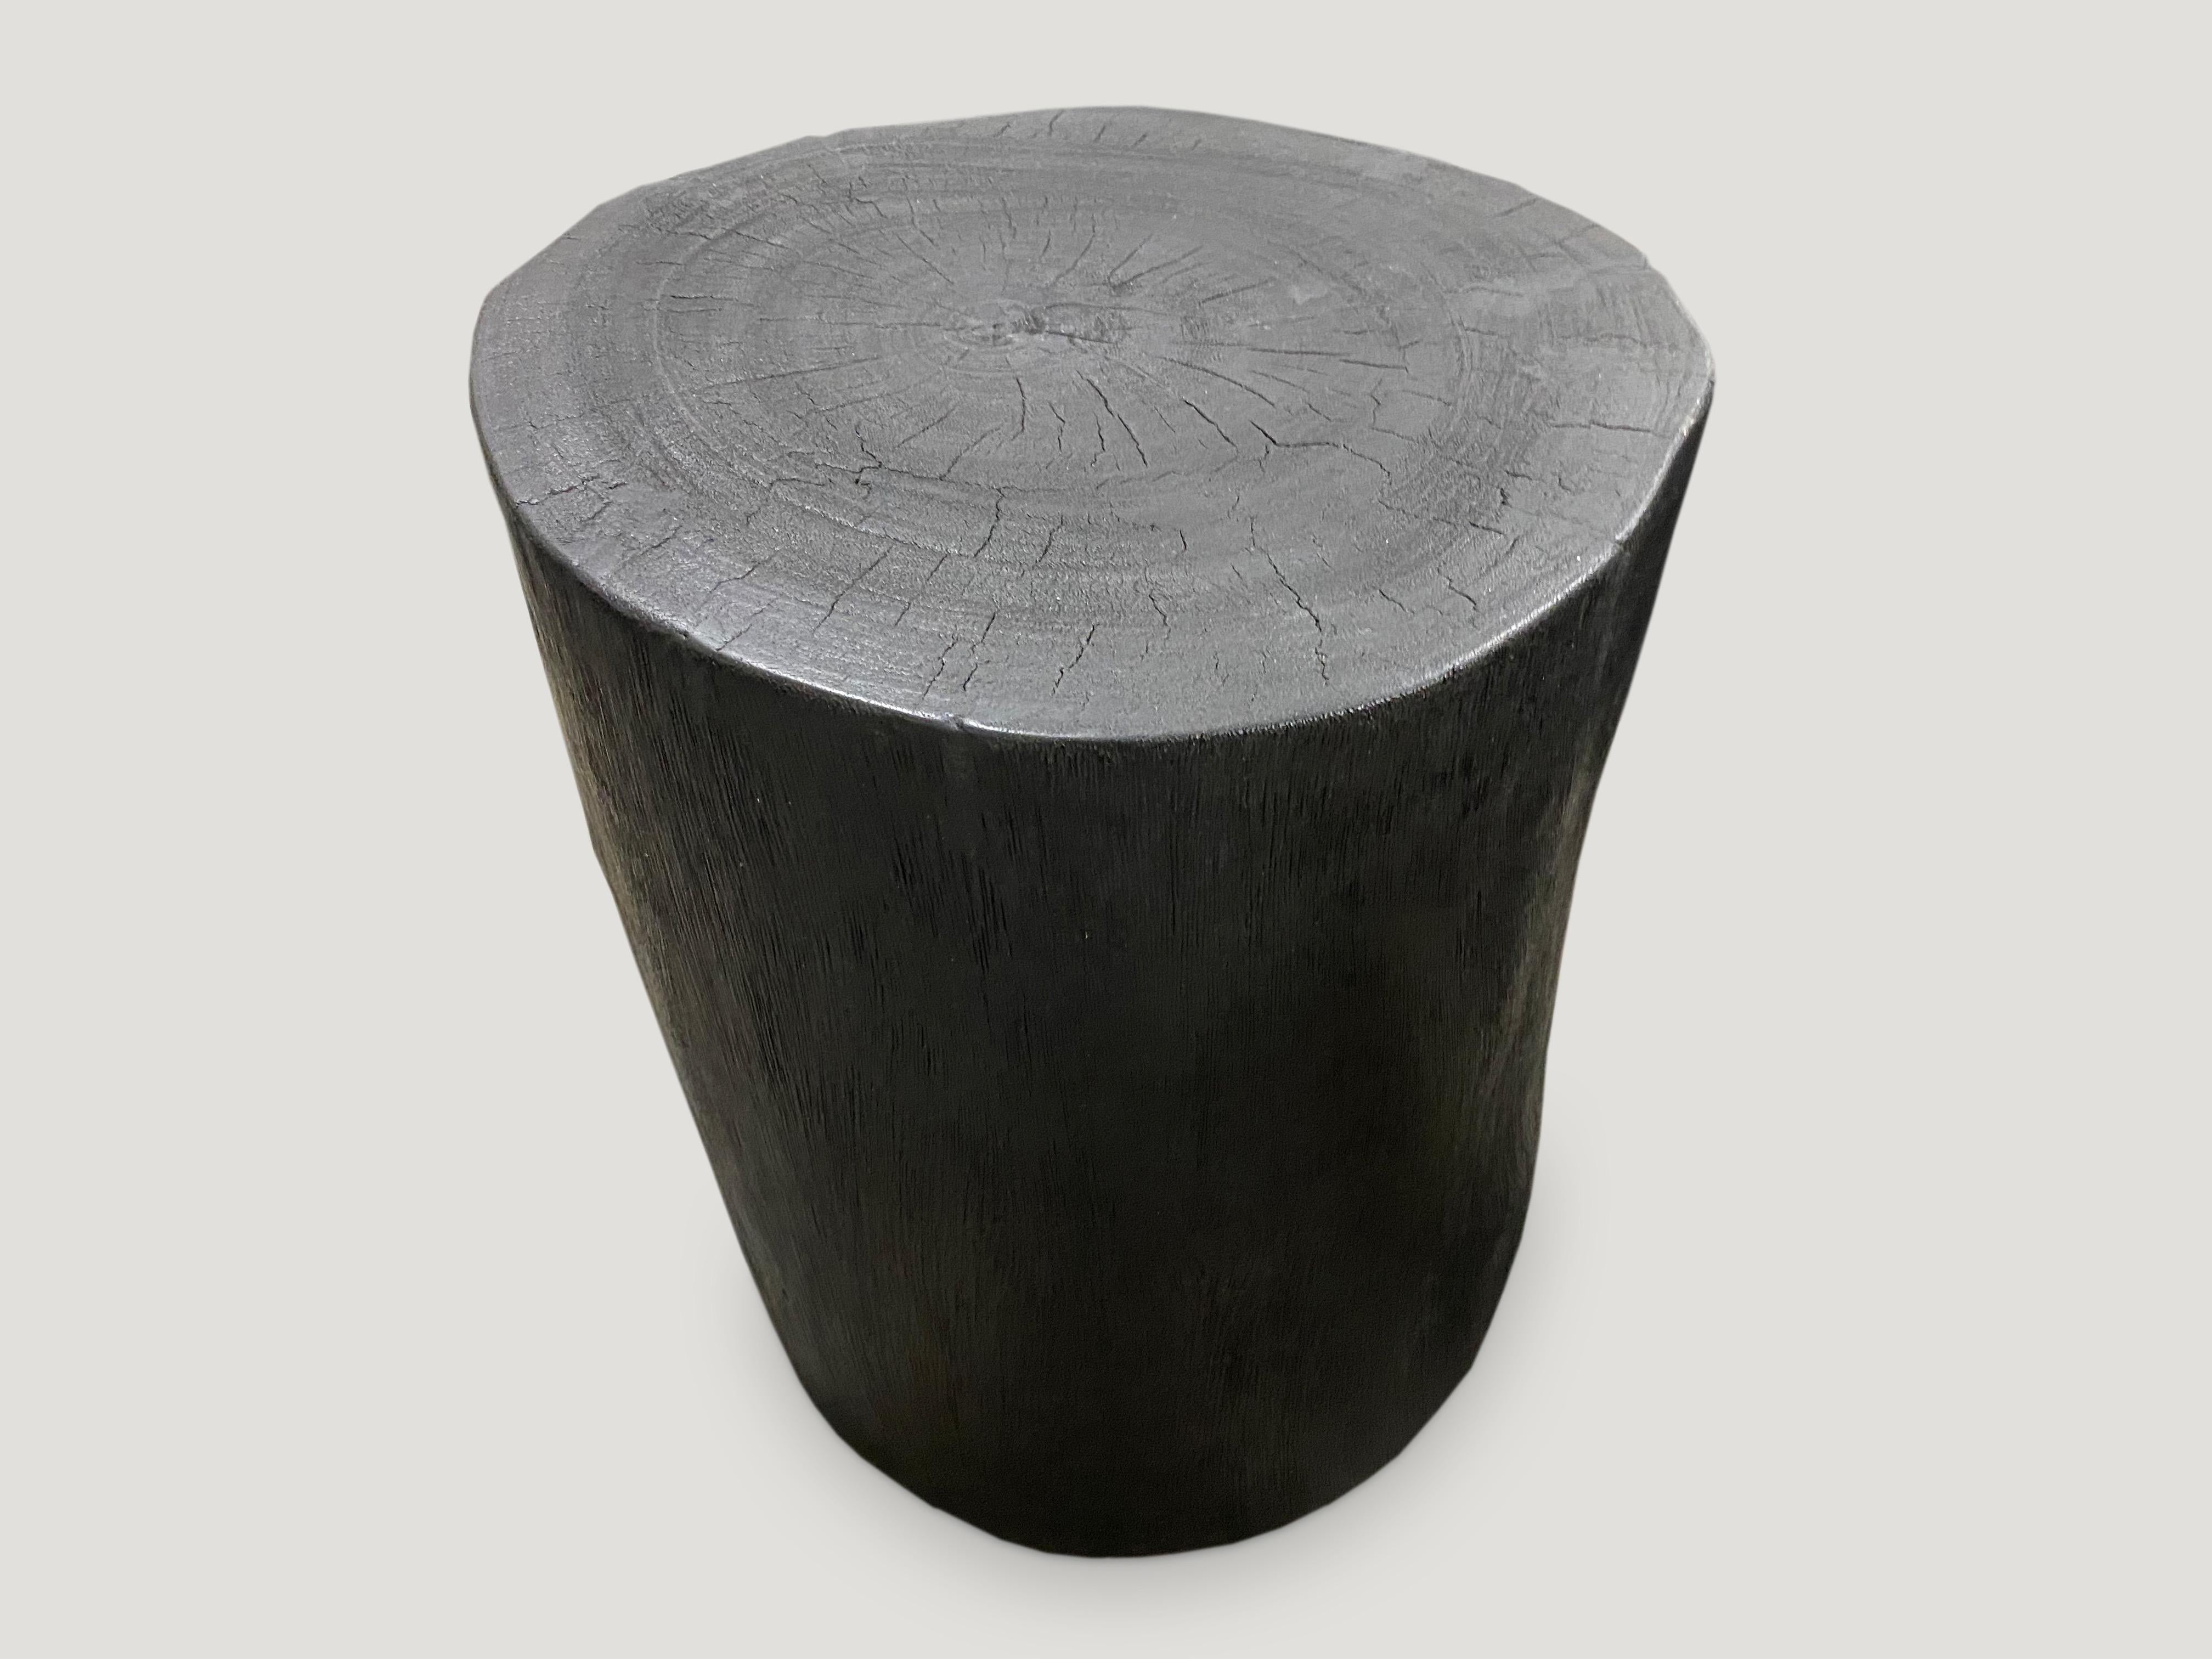 Minimalist hand carved reclaimed suar wood side table. Burnt, sanded and sealed whilst respecting the natural organic shape. We have a collection. The price and size reflect the one shown. All unique.

The Triple Burnt collection represents a